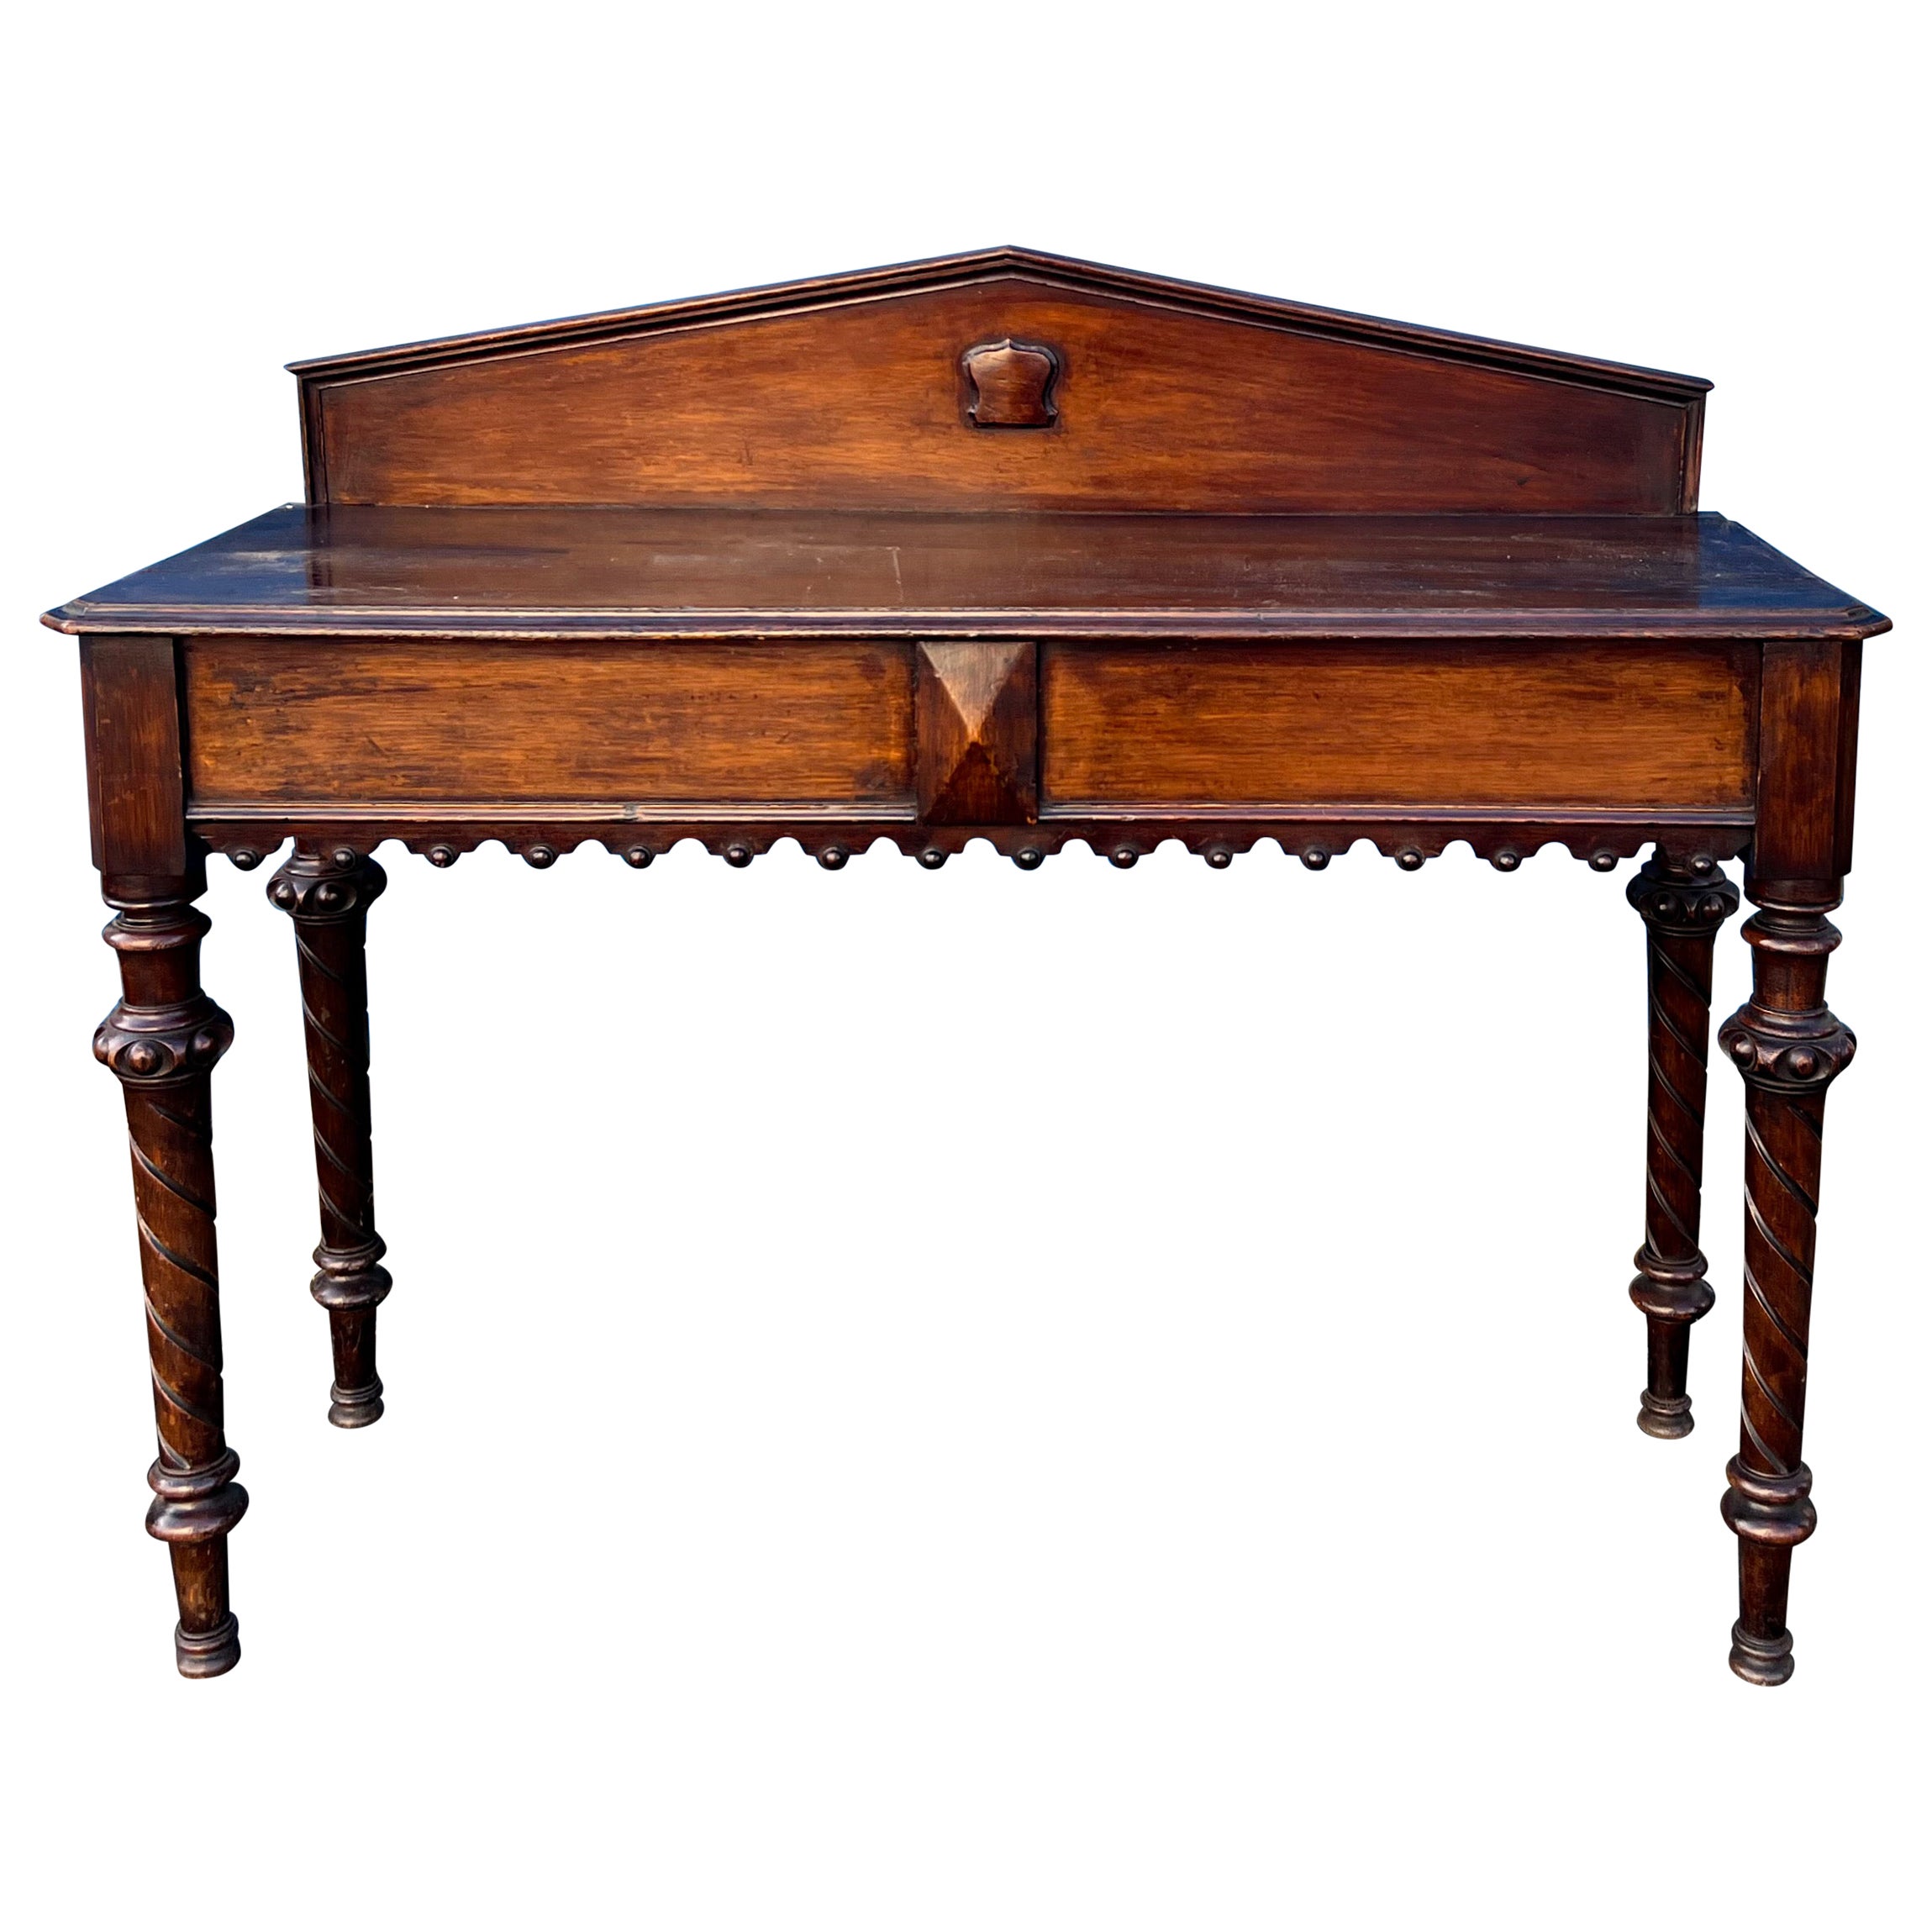 19th-C. Carved Walnut English Hunt Board / Console or Work Table / Desk